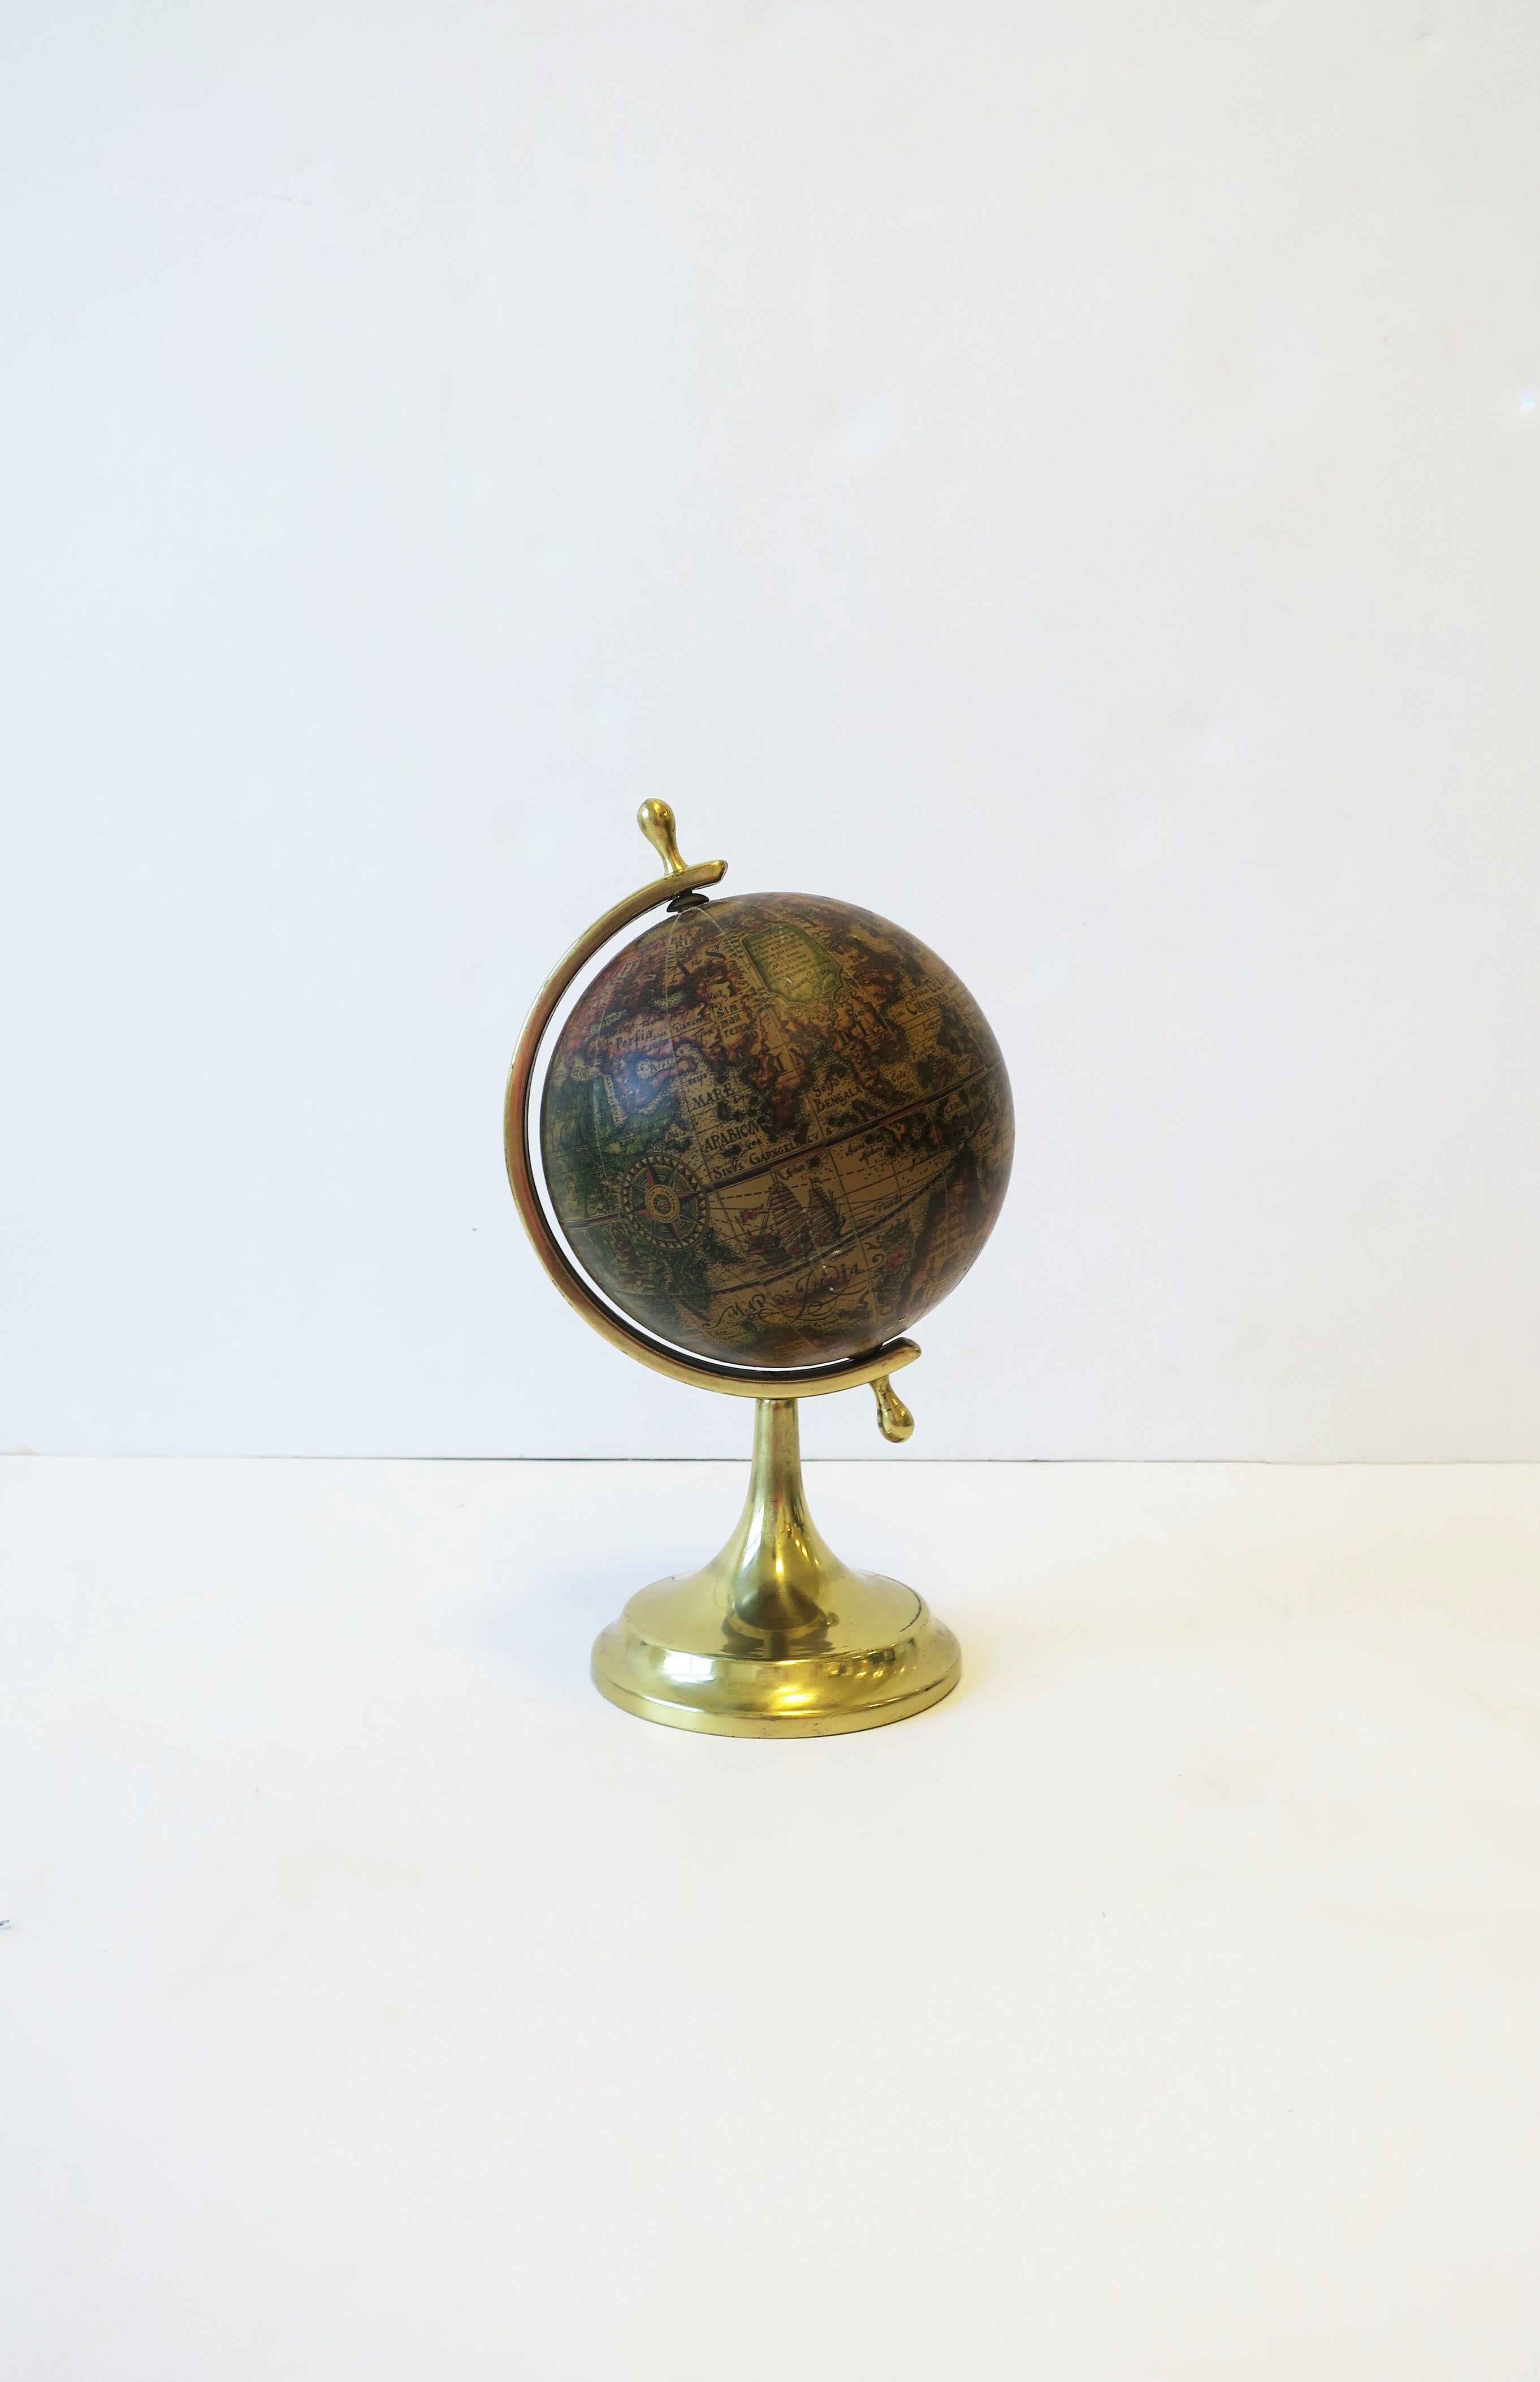 An Italian mid-20th century world globe that spins. Piece has a brass base and hardware. Marked 